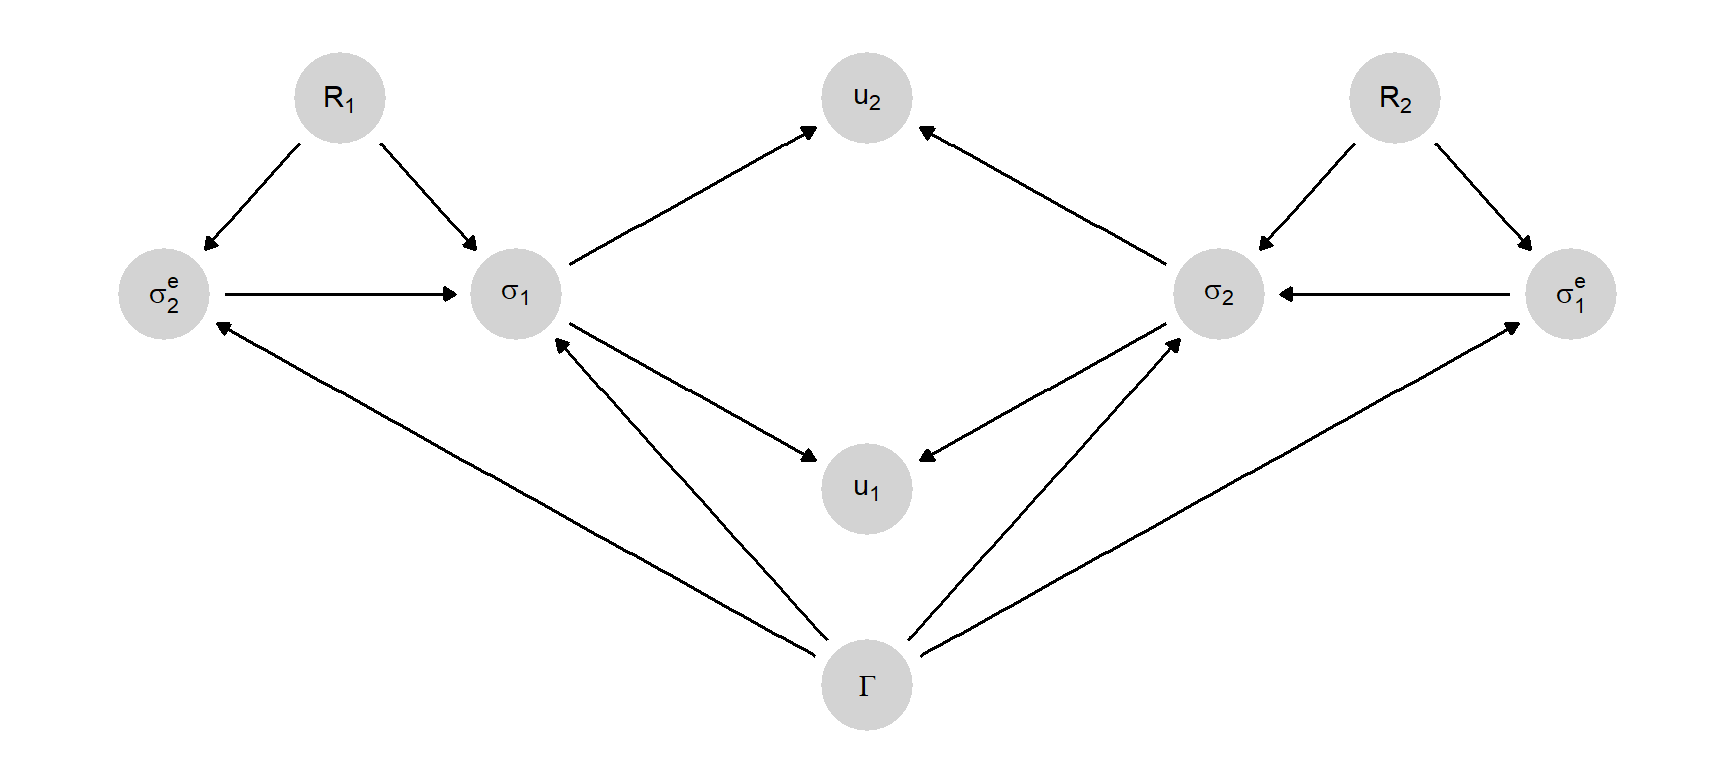 Formal structure of a normal form game (4).